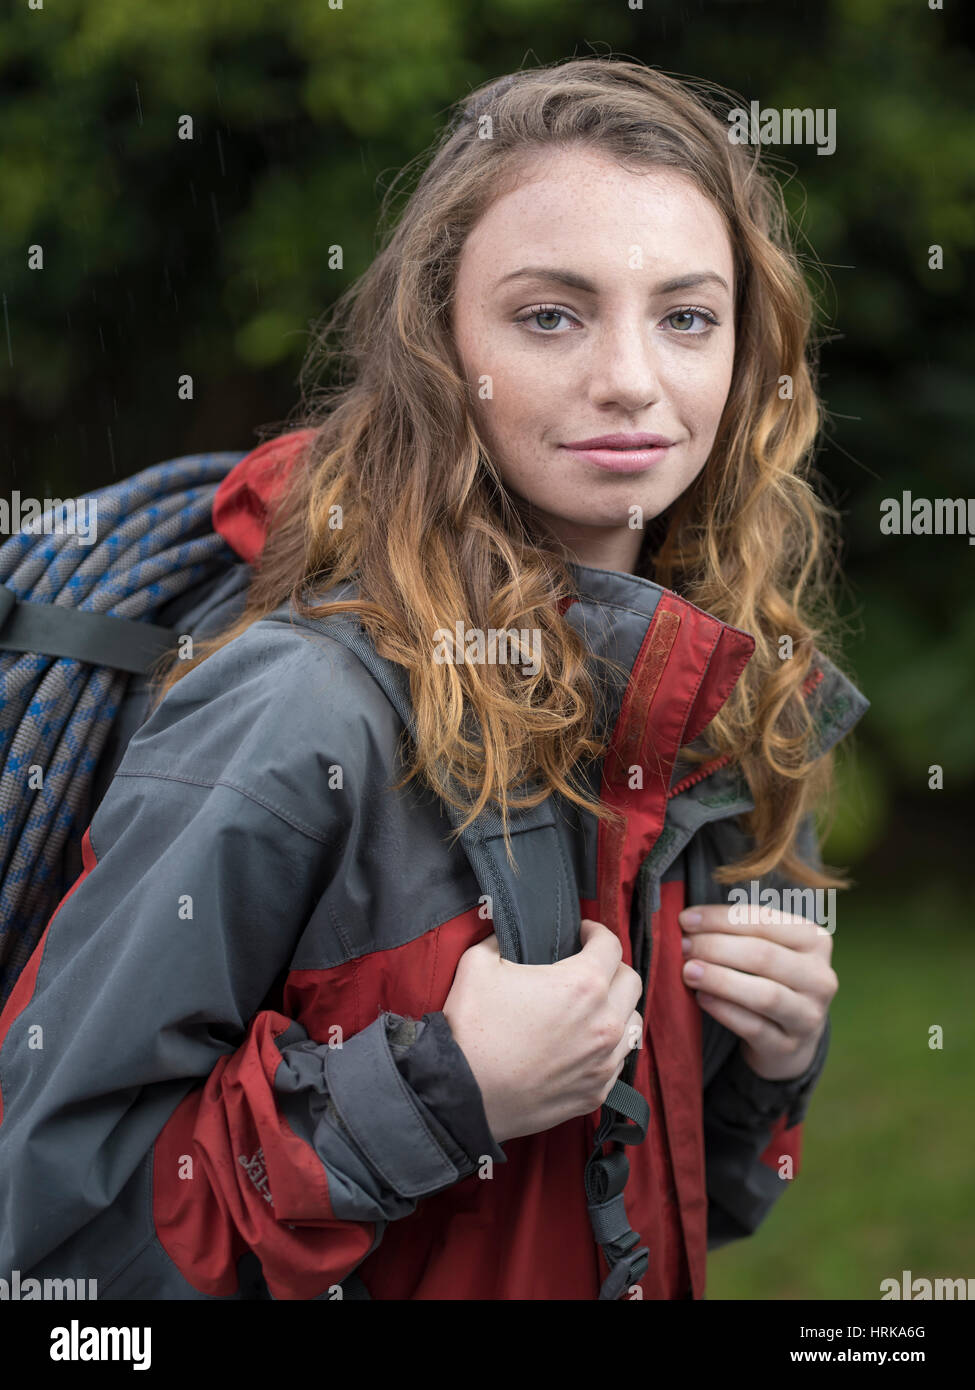 Young woman hiker with rope and jacket Stock Photo